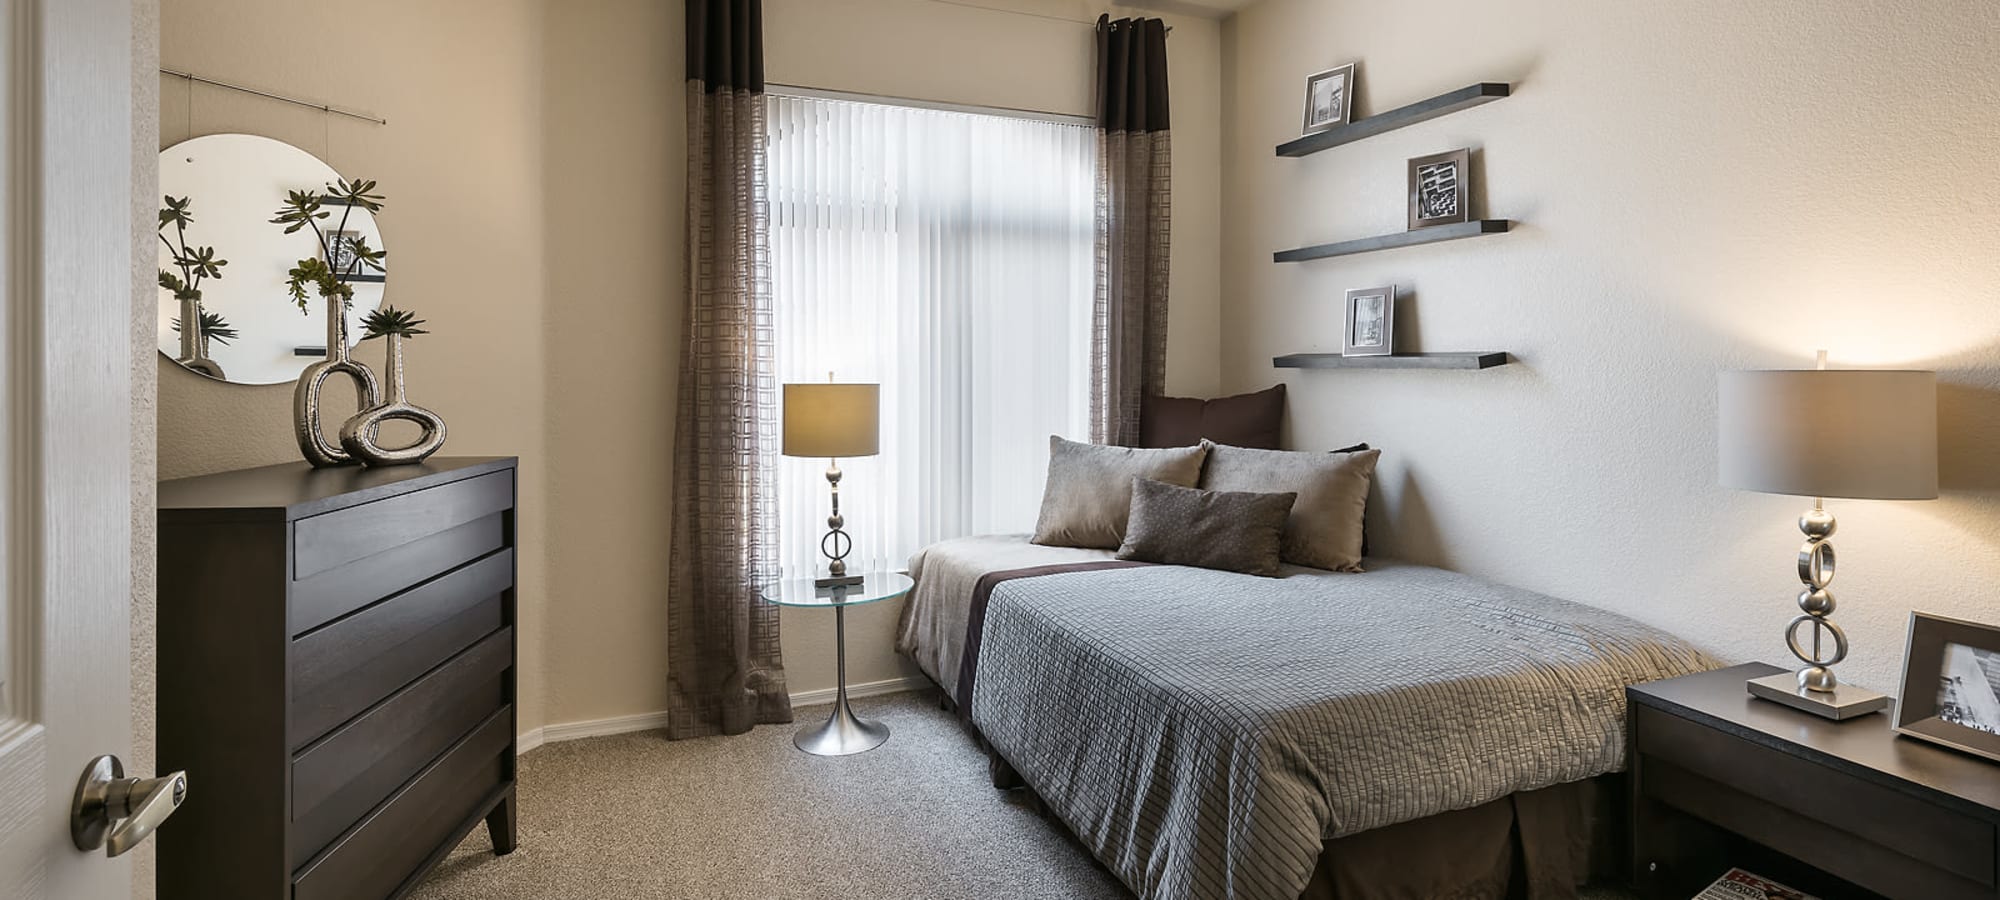 Guest bedroom with furniture at San Lagos in Glendale, Arizona